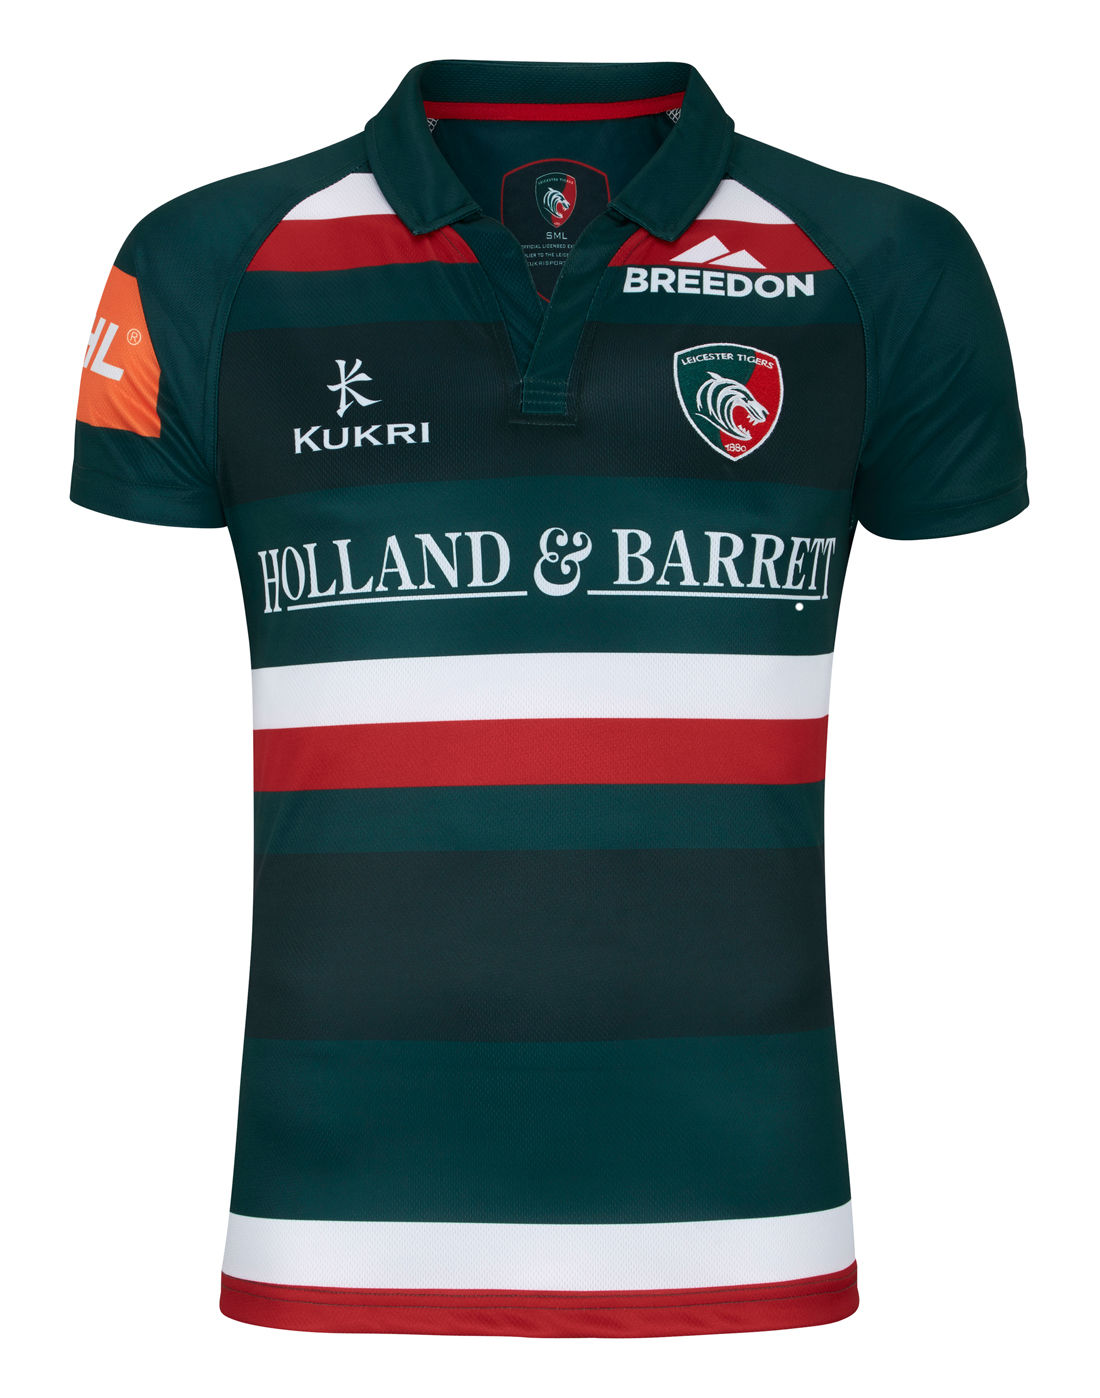 leicester tigers rugby shirt